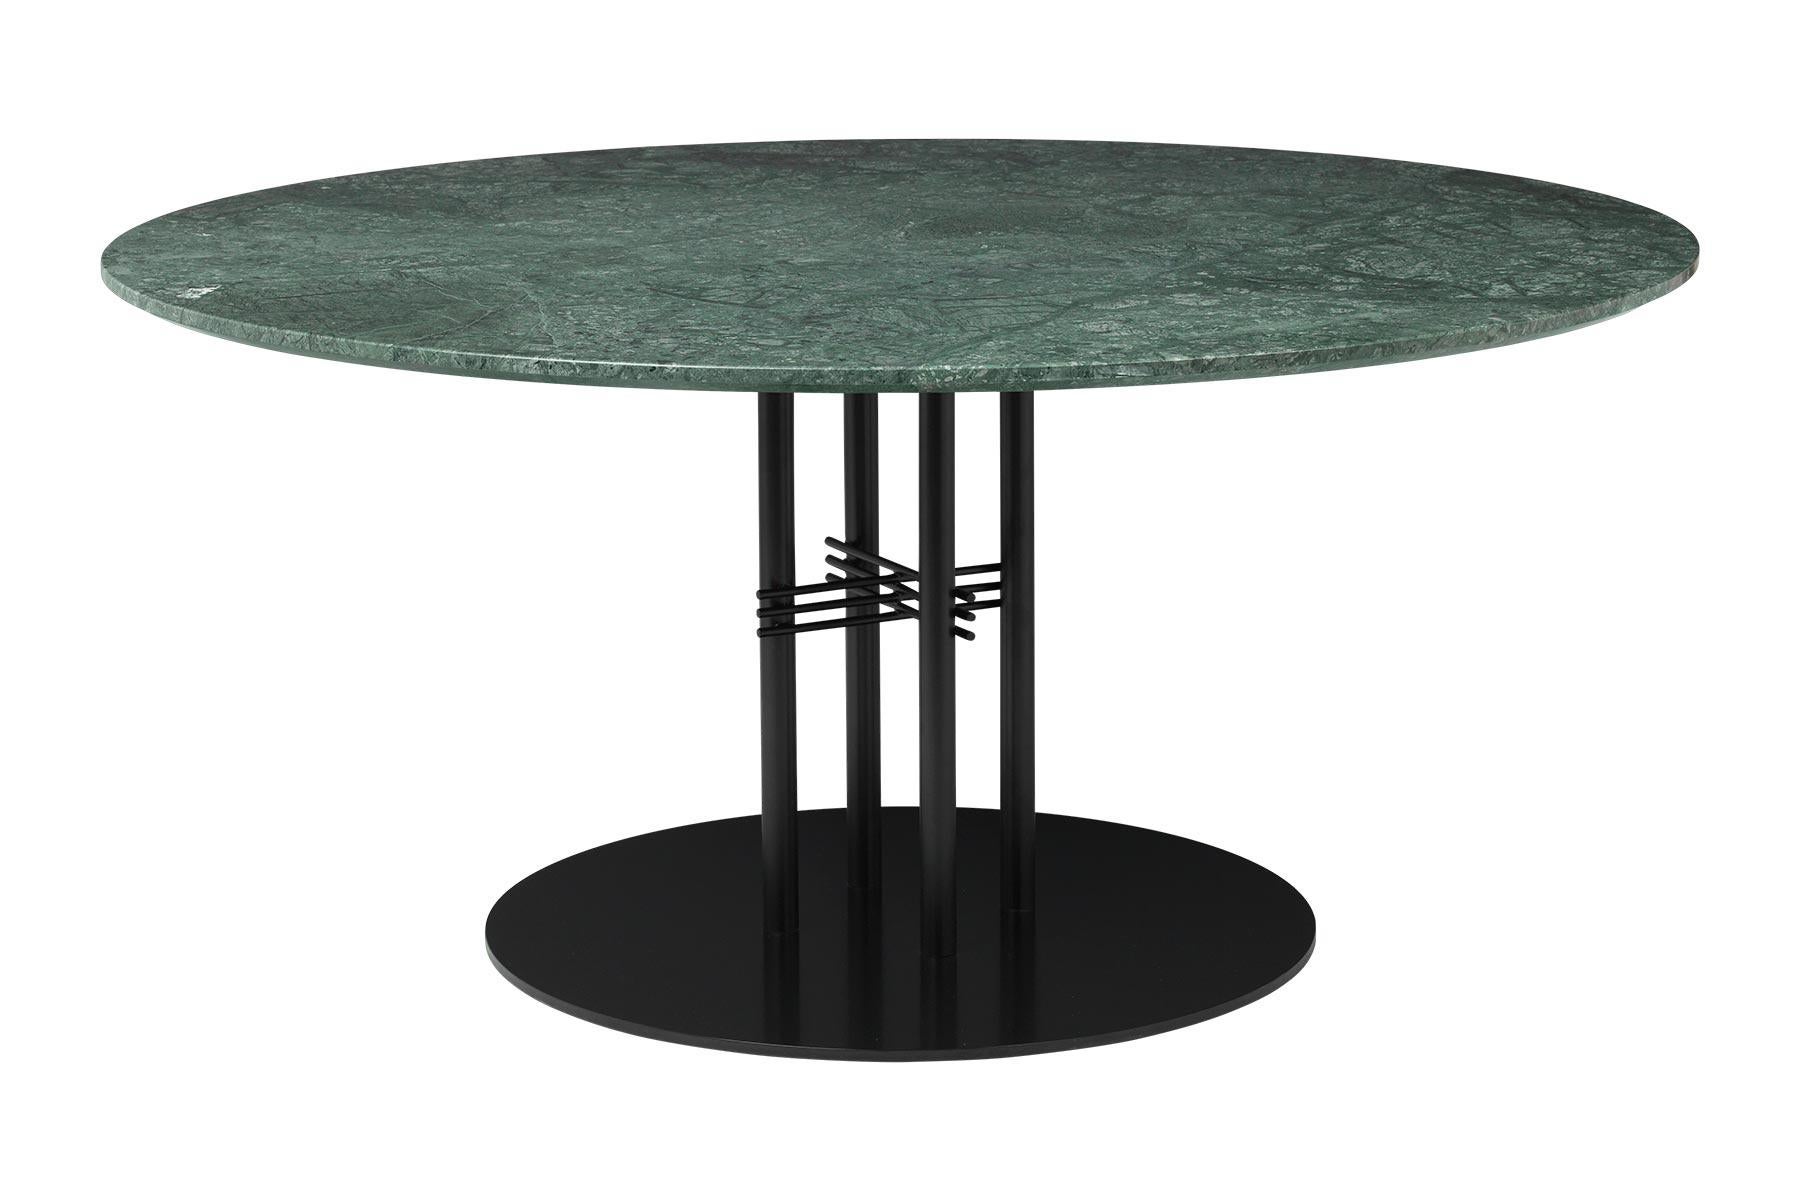 With TS collection, the design duo GamFratesi has proven that a strong design idea can hold a wealth of development possibilities. Gubi is proud to present its latest additions, the TS column bar table, dining table and lounge table.

The TS